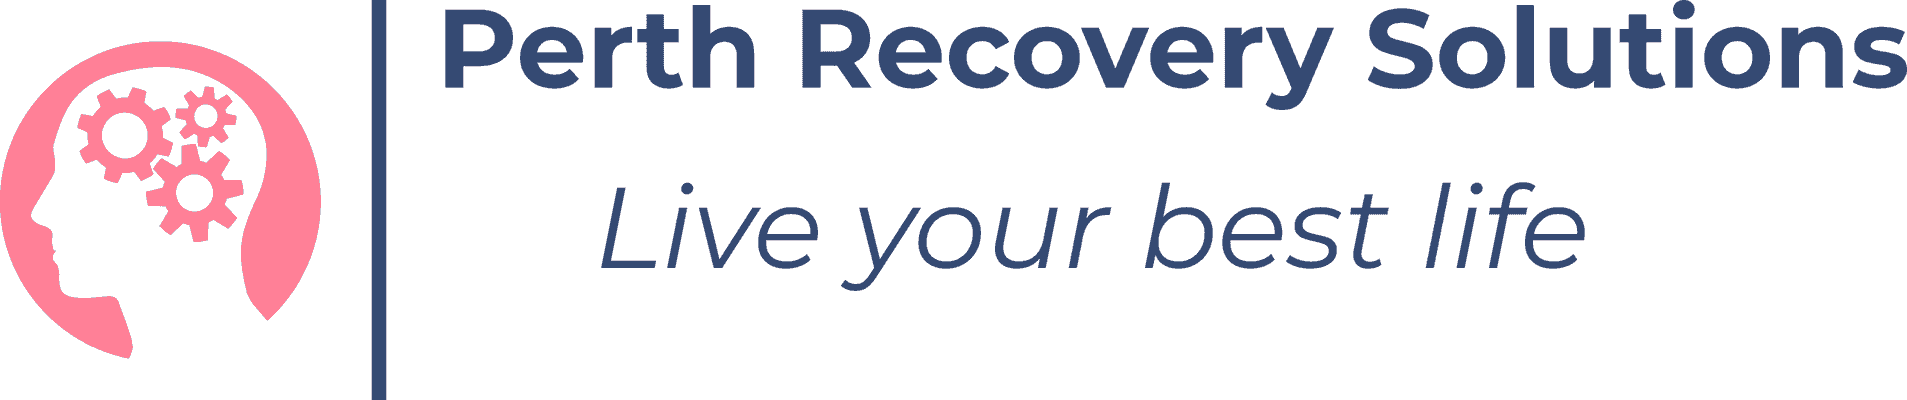 Recovery Solutions